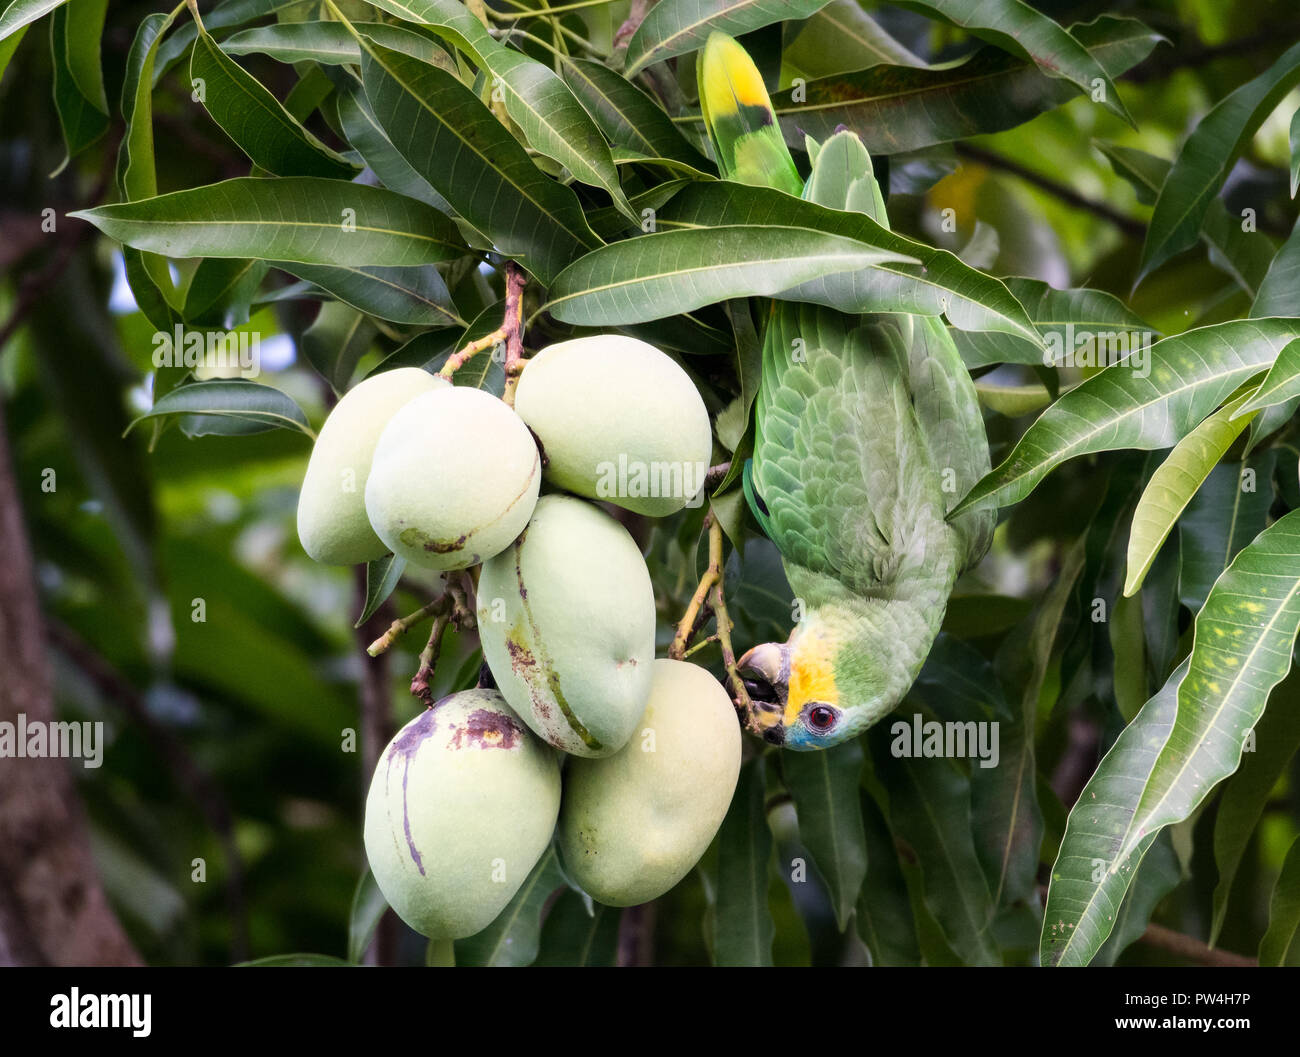 Parrot Eating Mango High Resolution Stock Photography and Images - Alamy